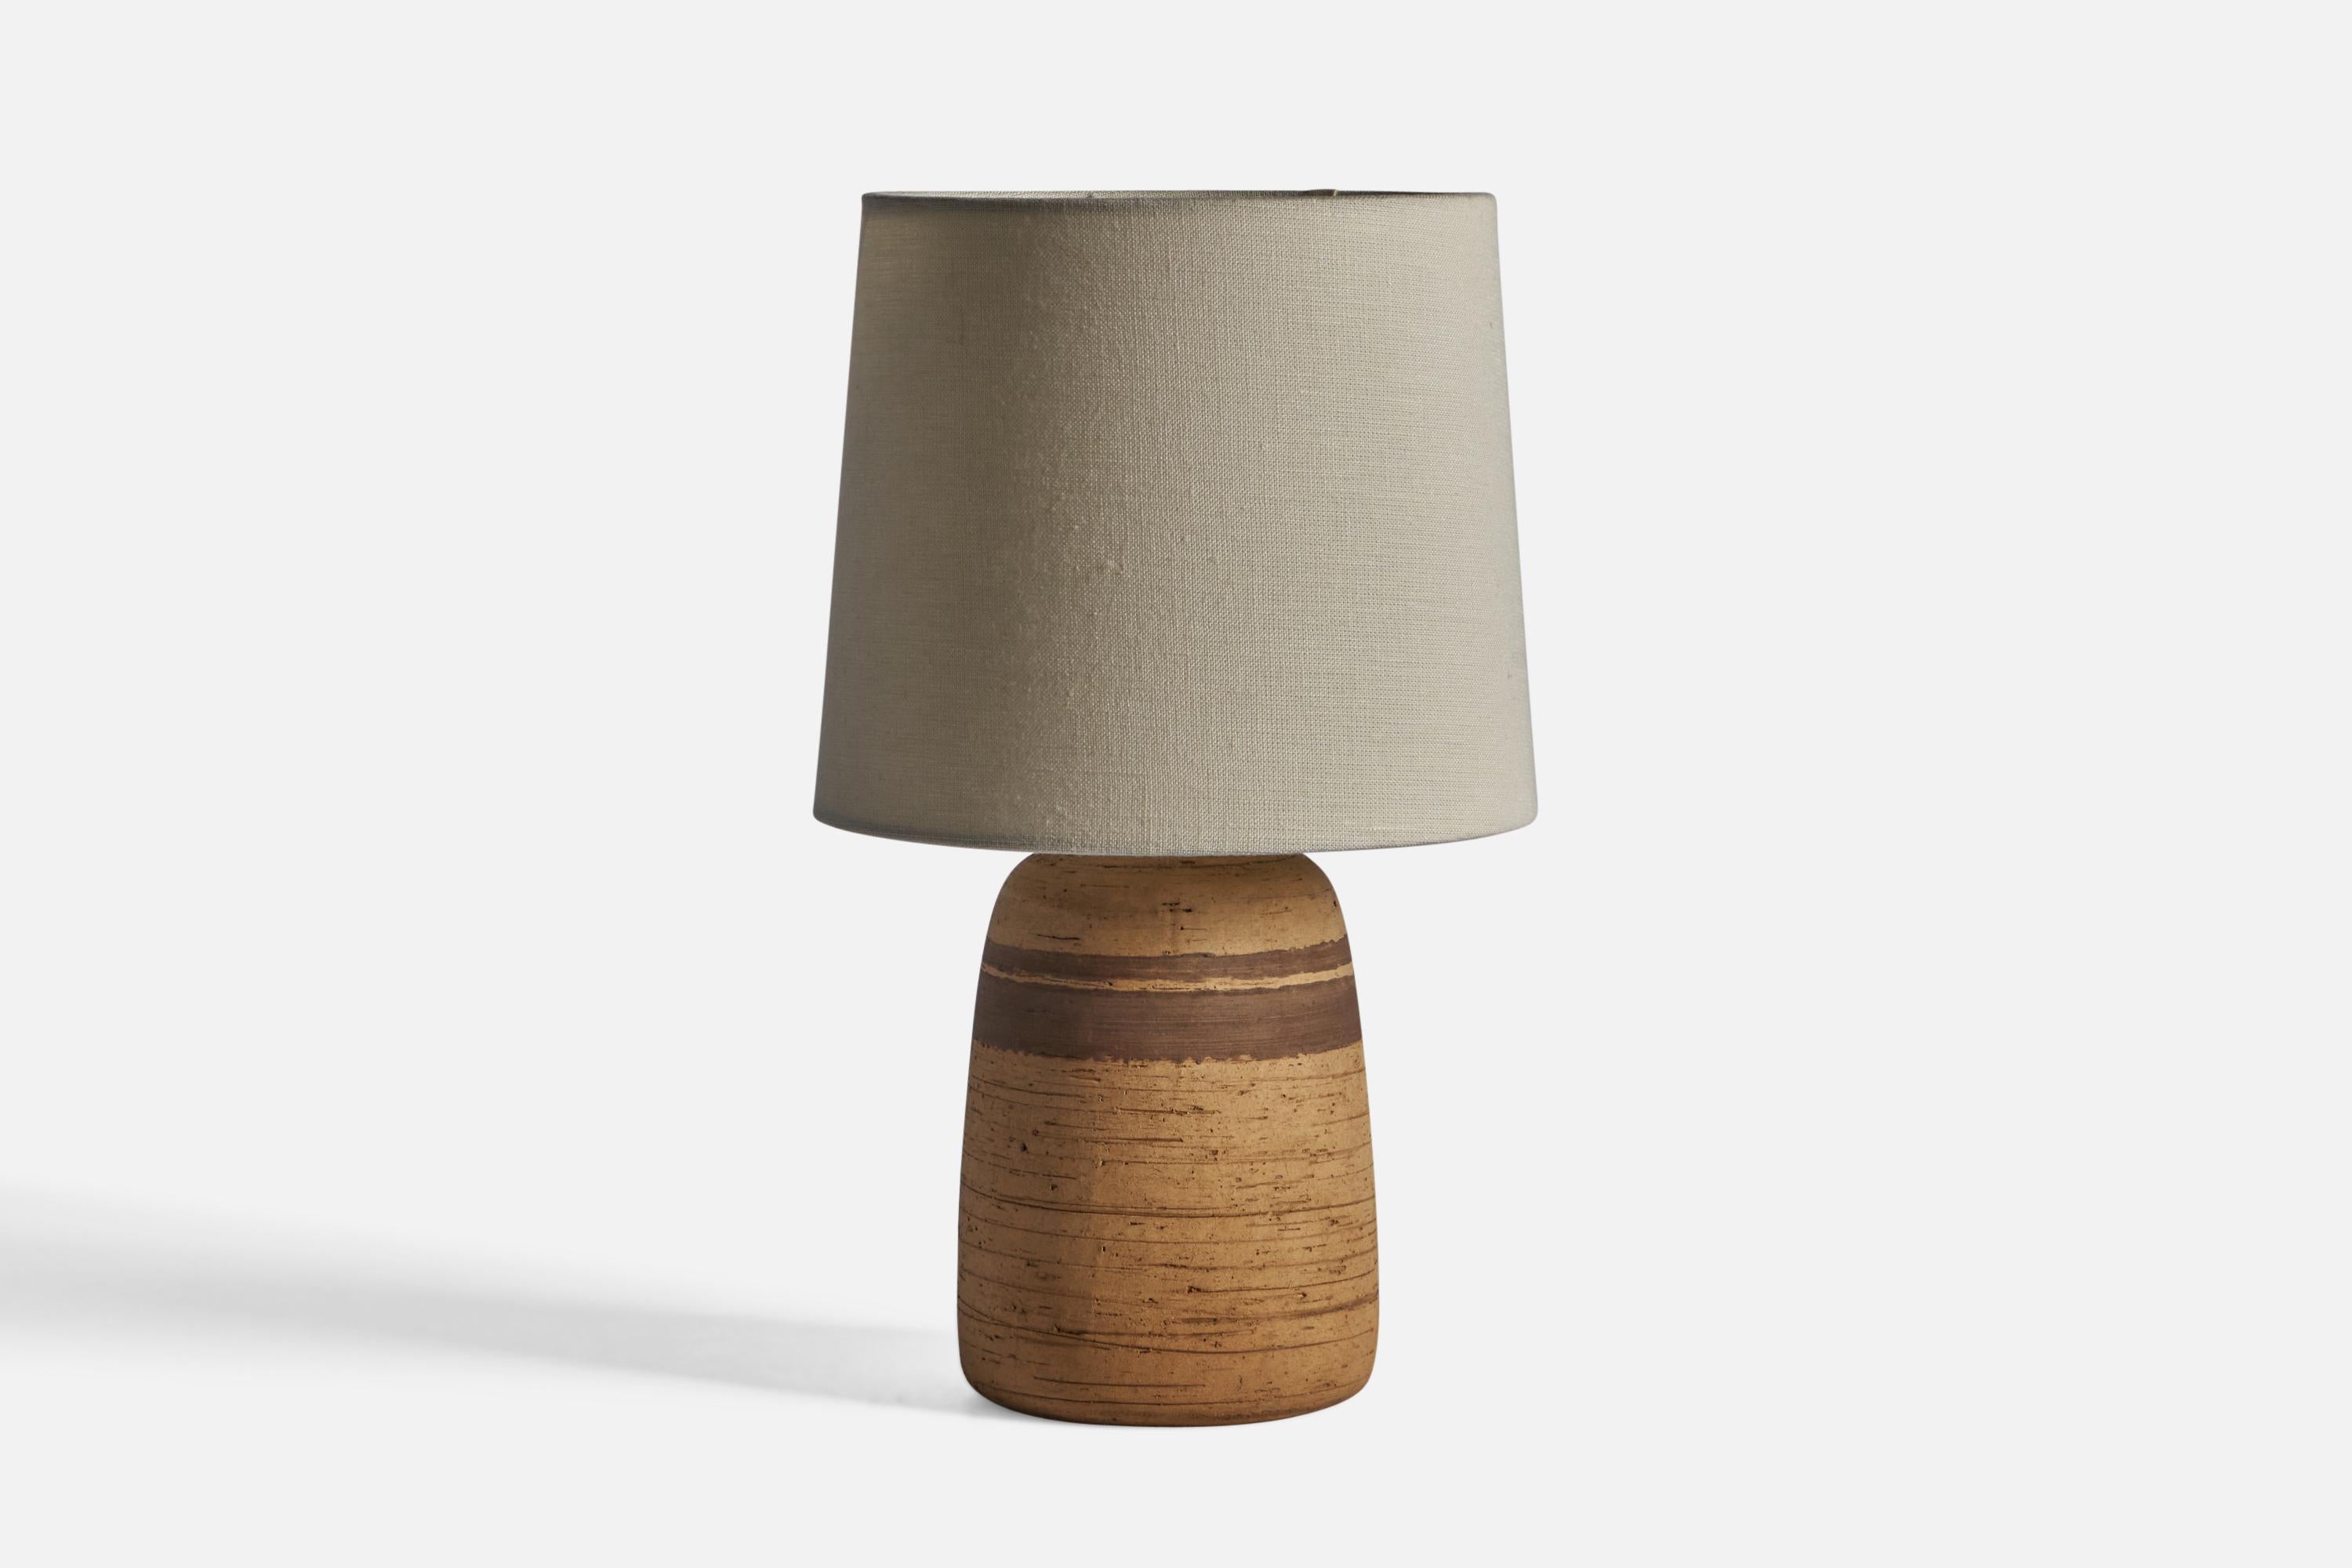 A brown and beige stoneware table lamp, designed and produced in Sweden c. 1960s.

Dimensions of Lamp (inches) : 13.5